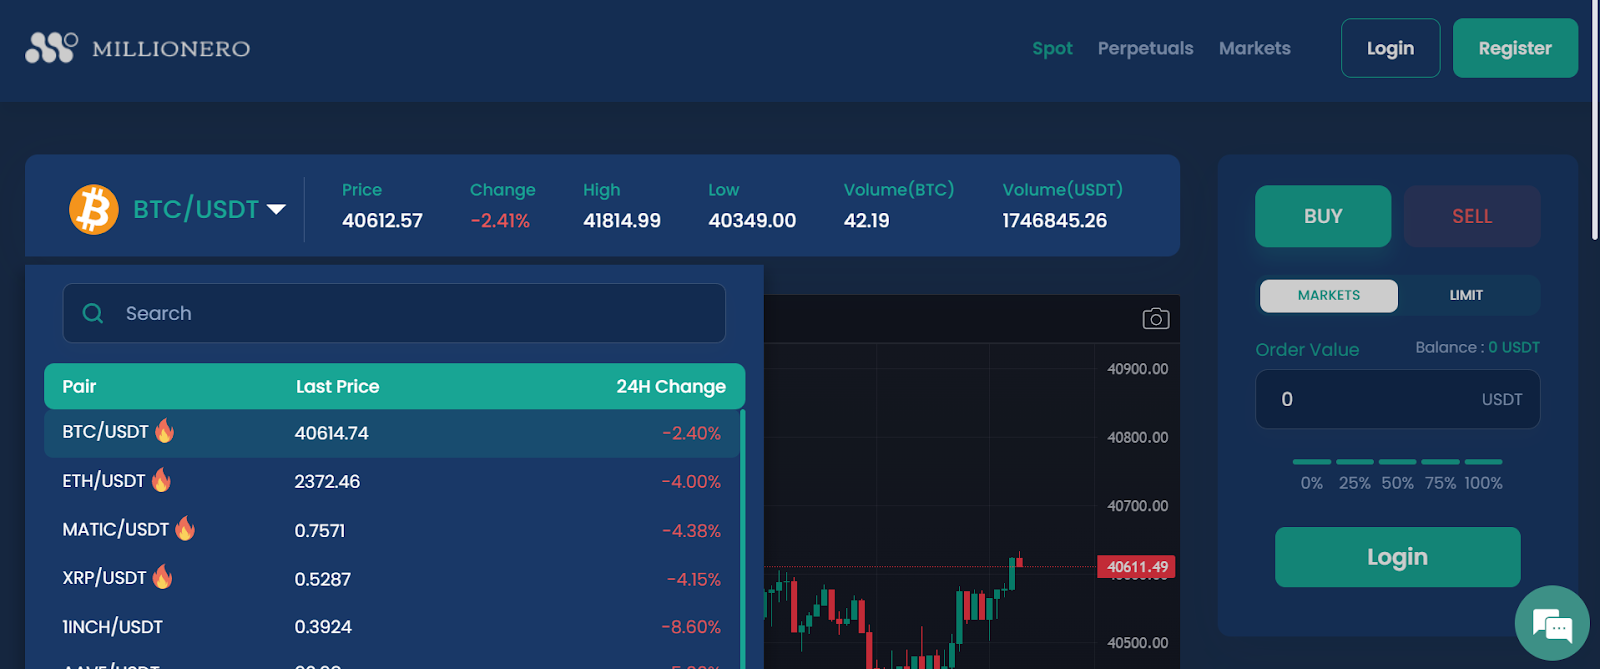 Crypto pairs with USDT as quote currency in the Millionero Spot market